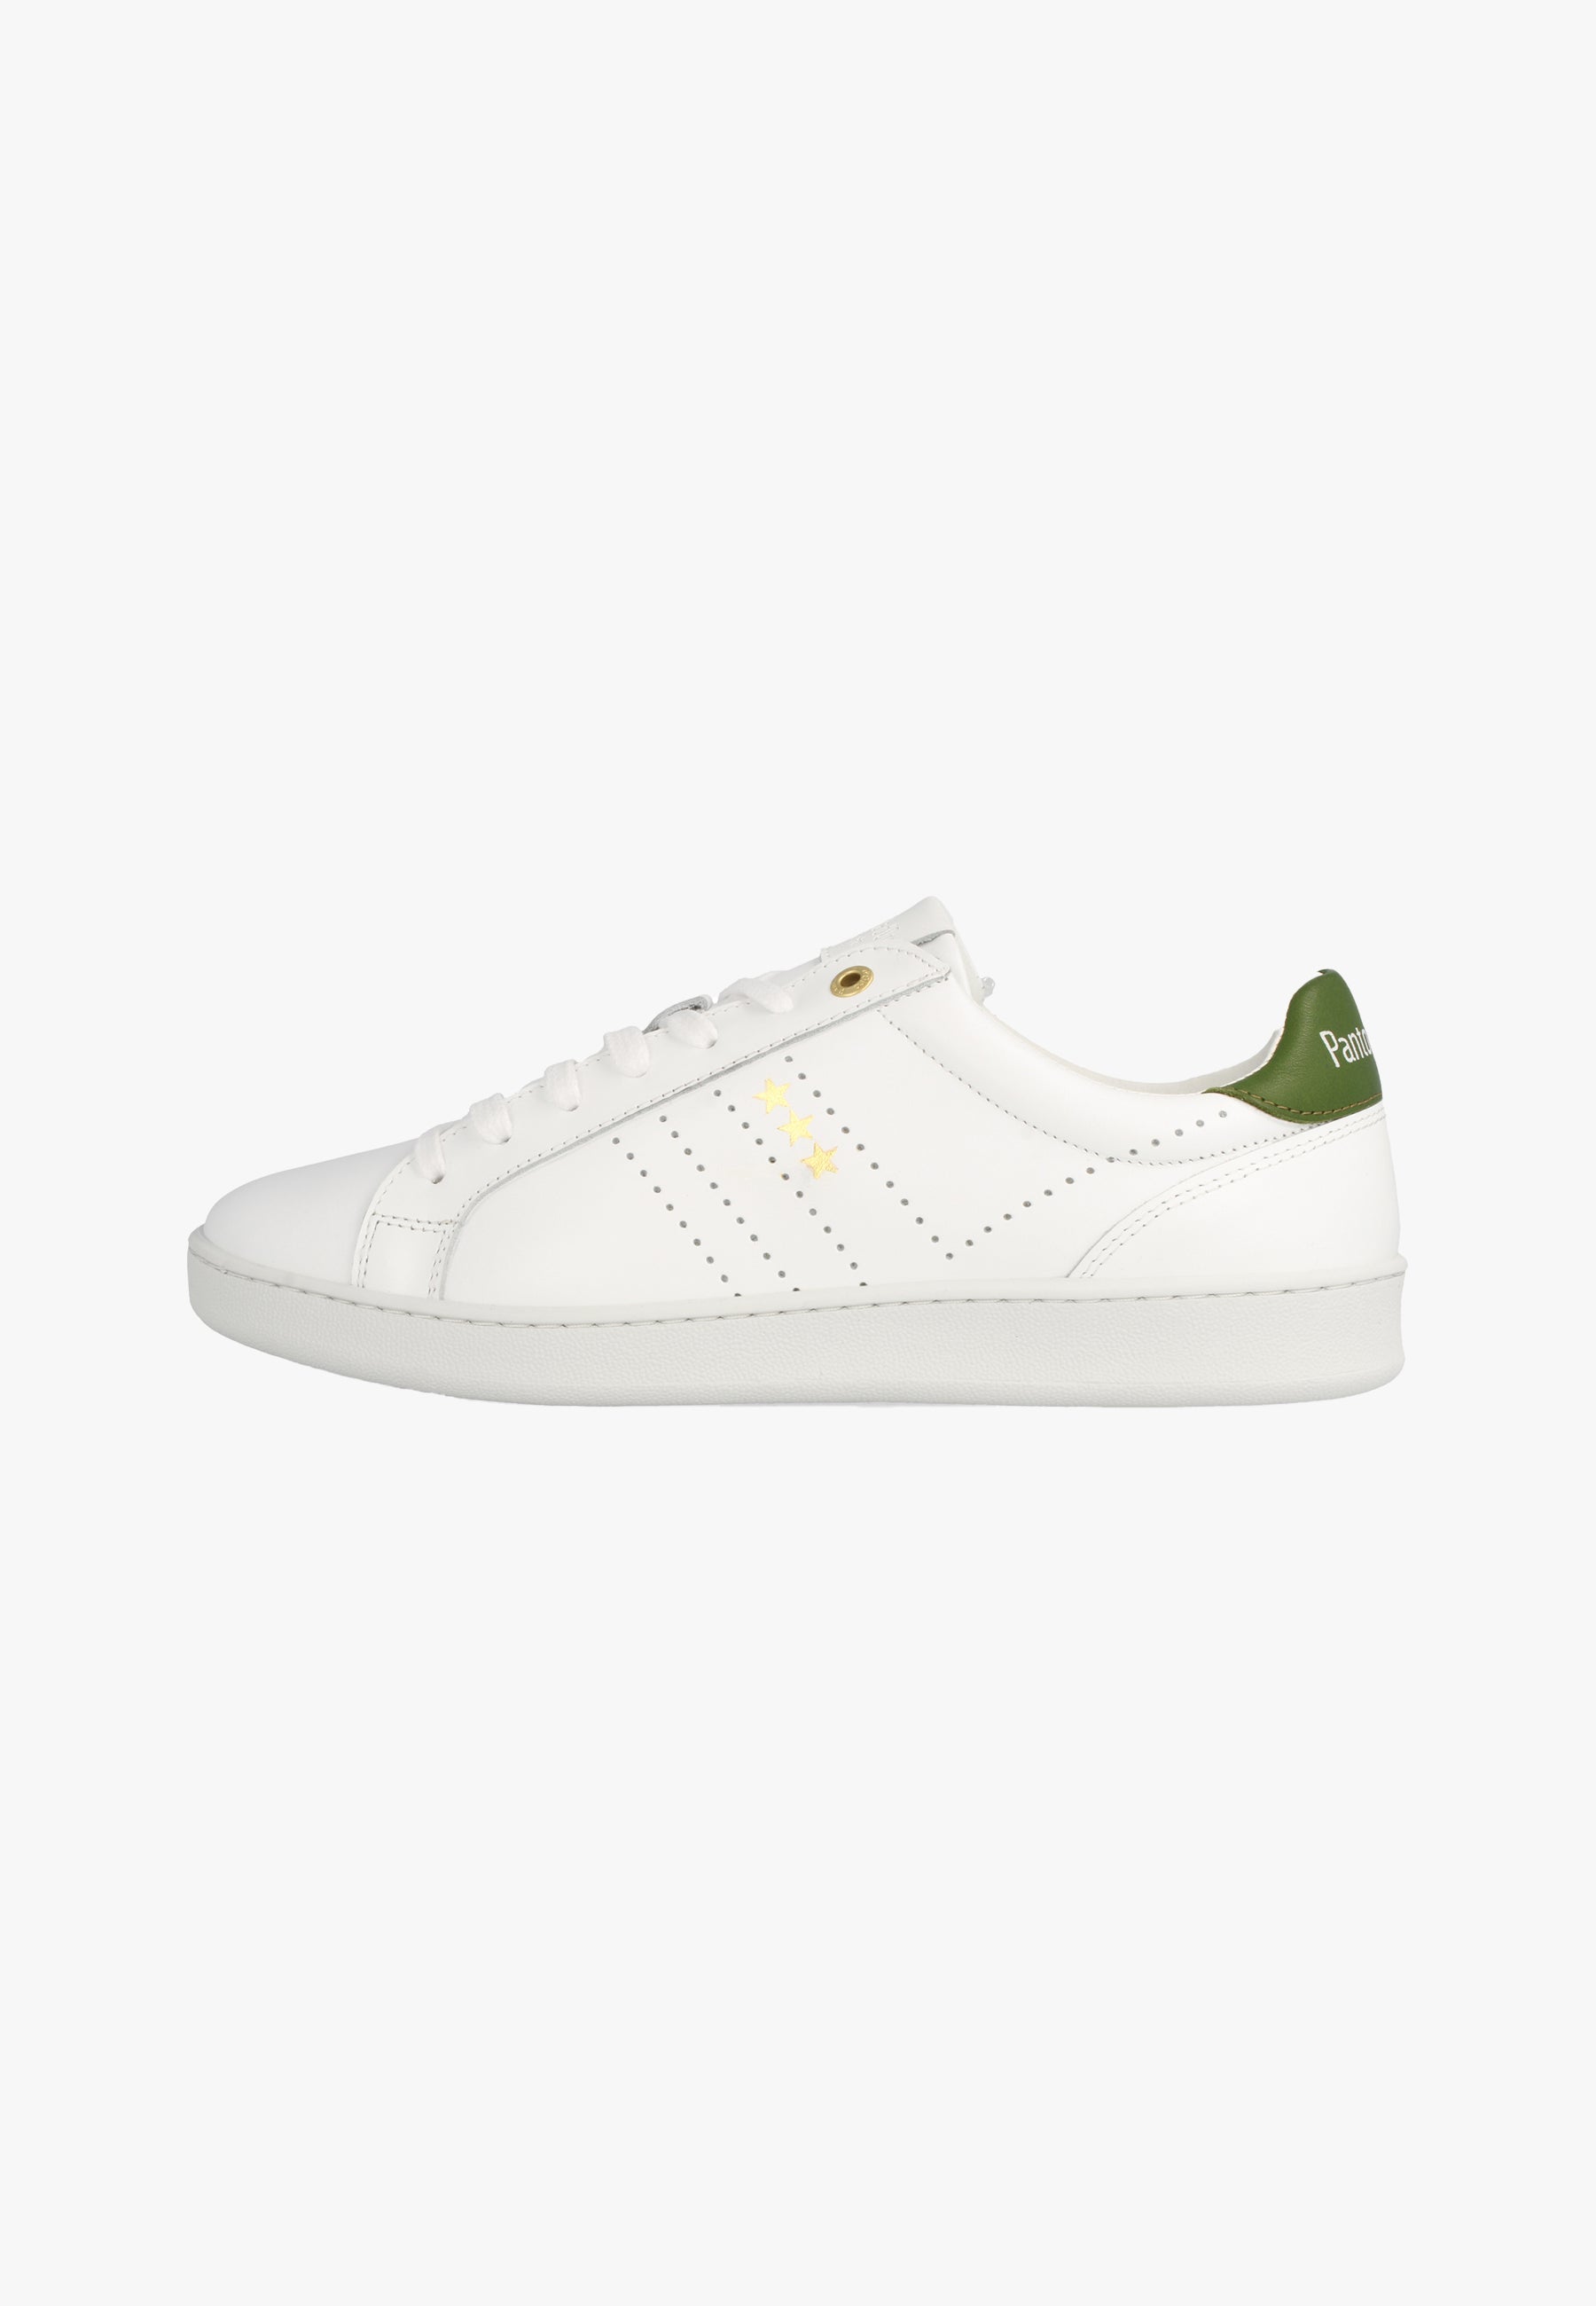 Arona 2.0 Low in Bright White Sneakers Pantofola d'Oro   